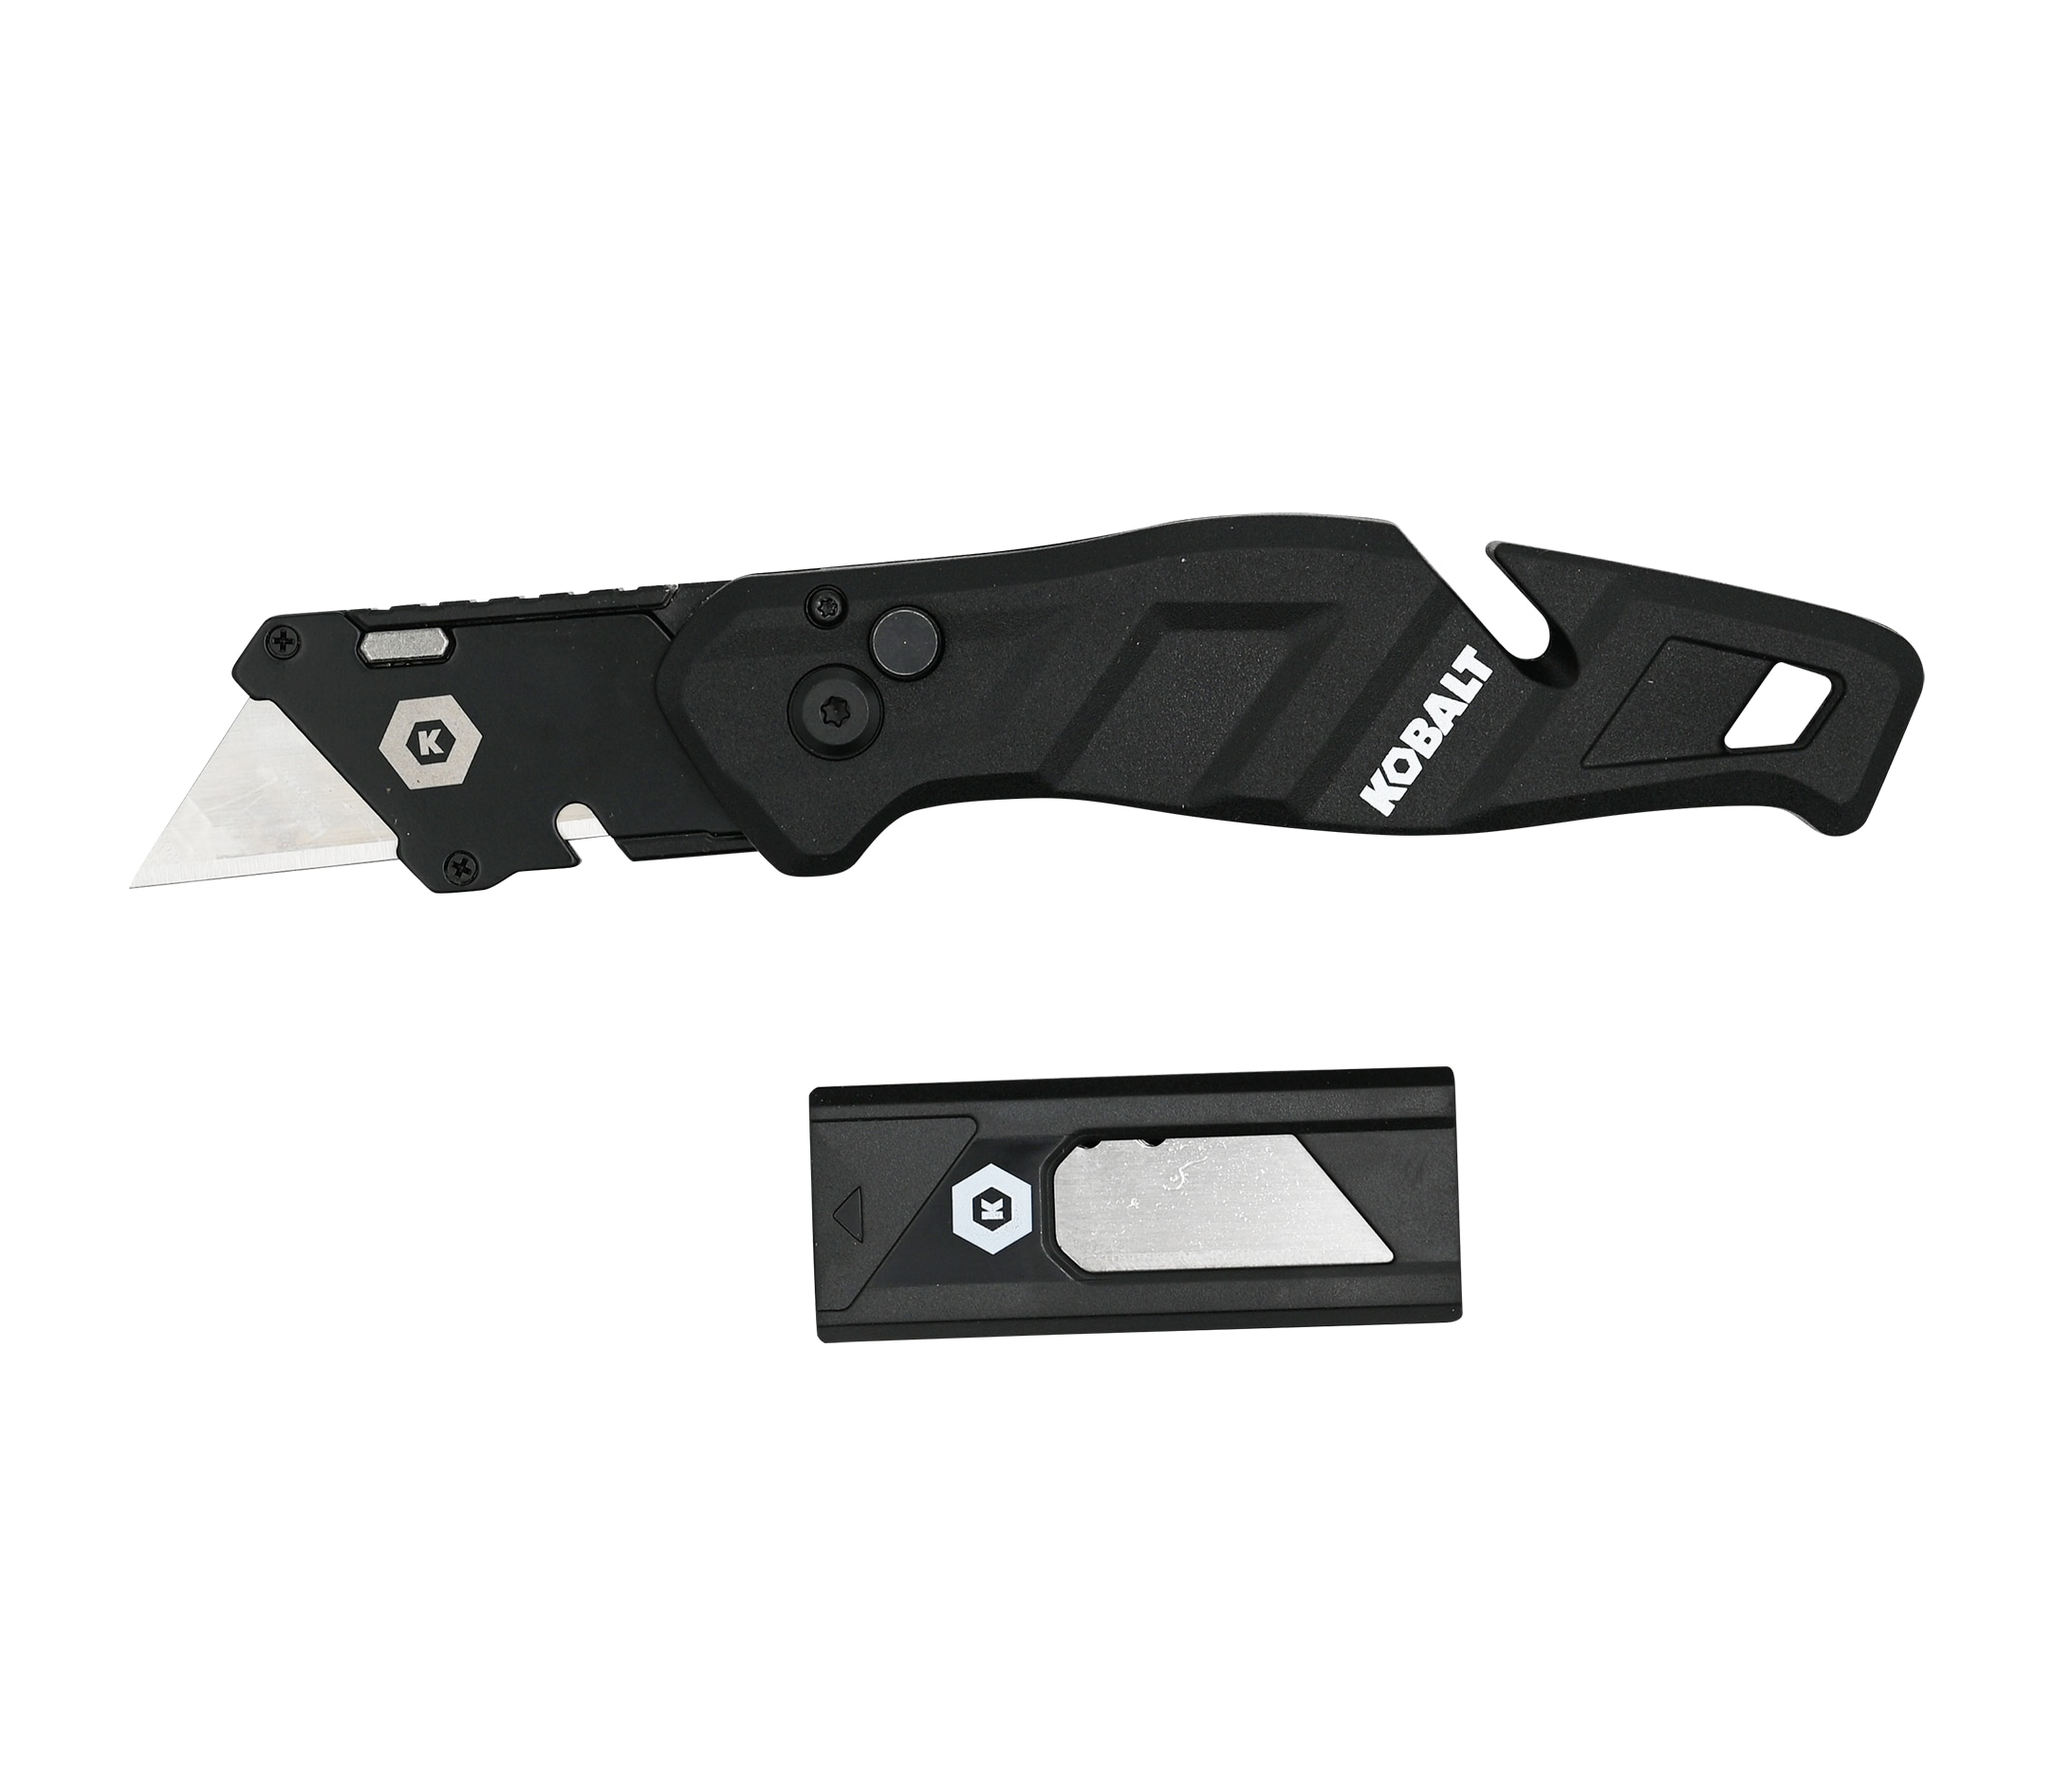 TIFICAL 3-Pack Box Cutter, Utility Knife with Self-Locking Design